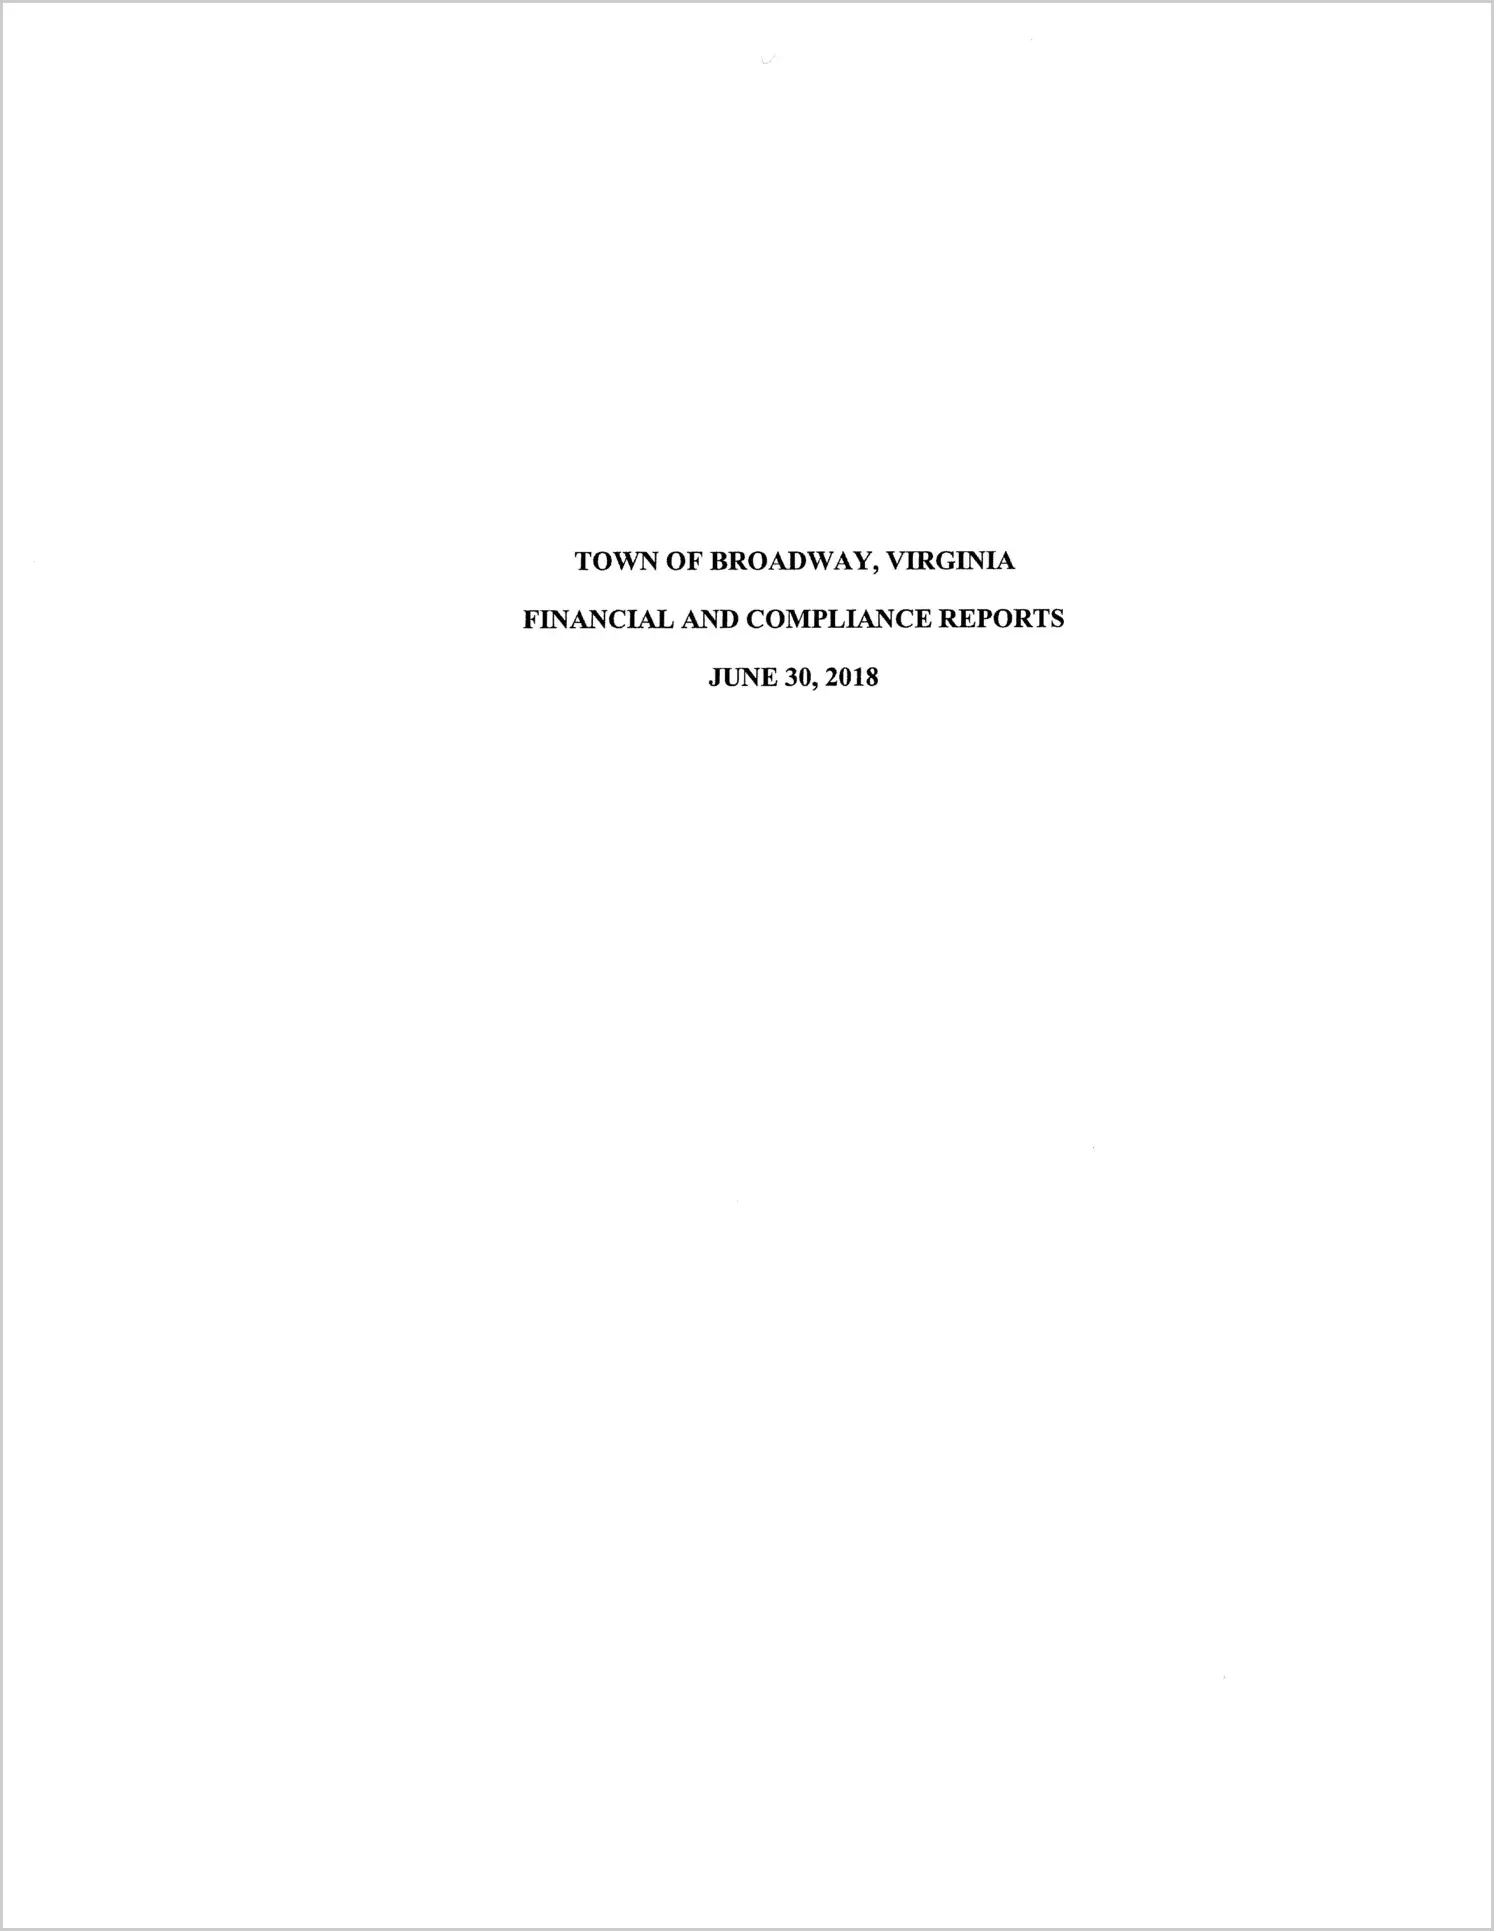 2018 Annual Financial Report for Town of Broadway